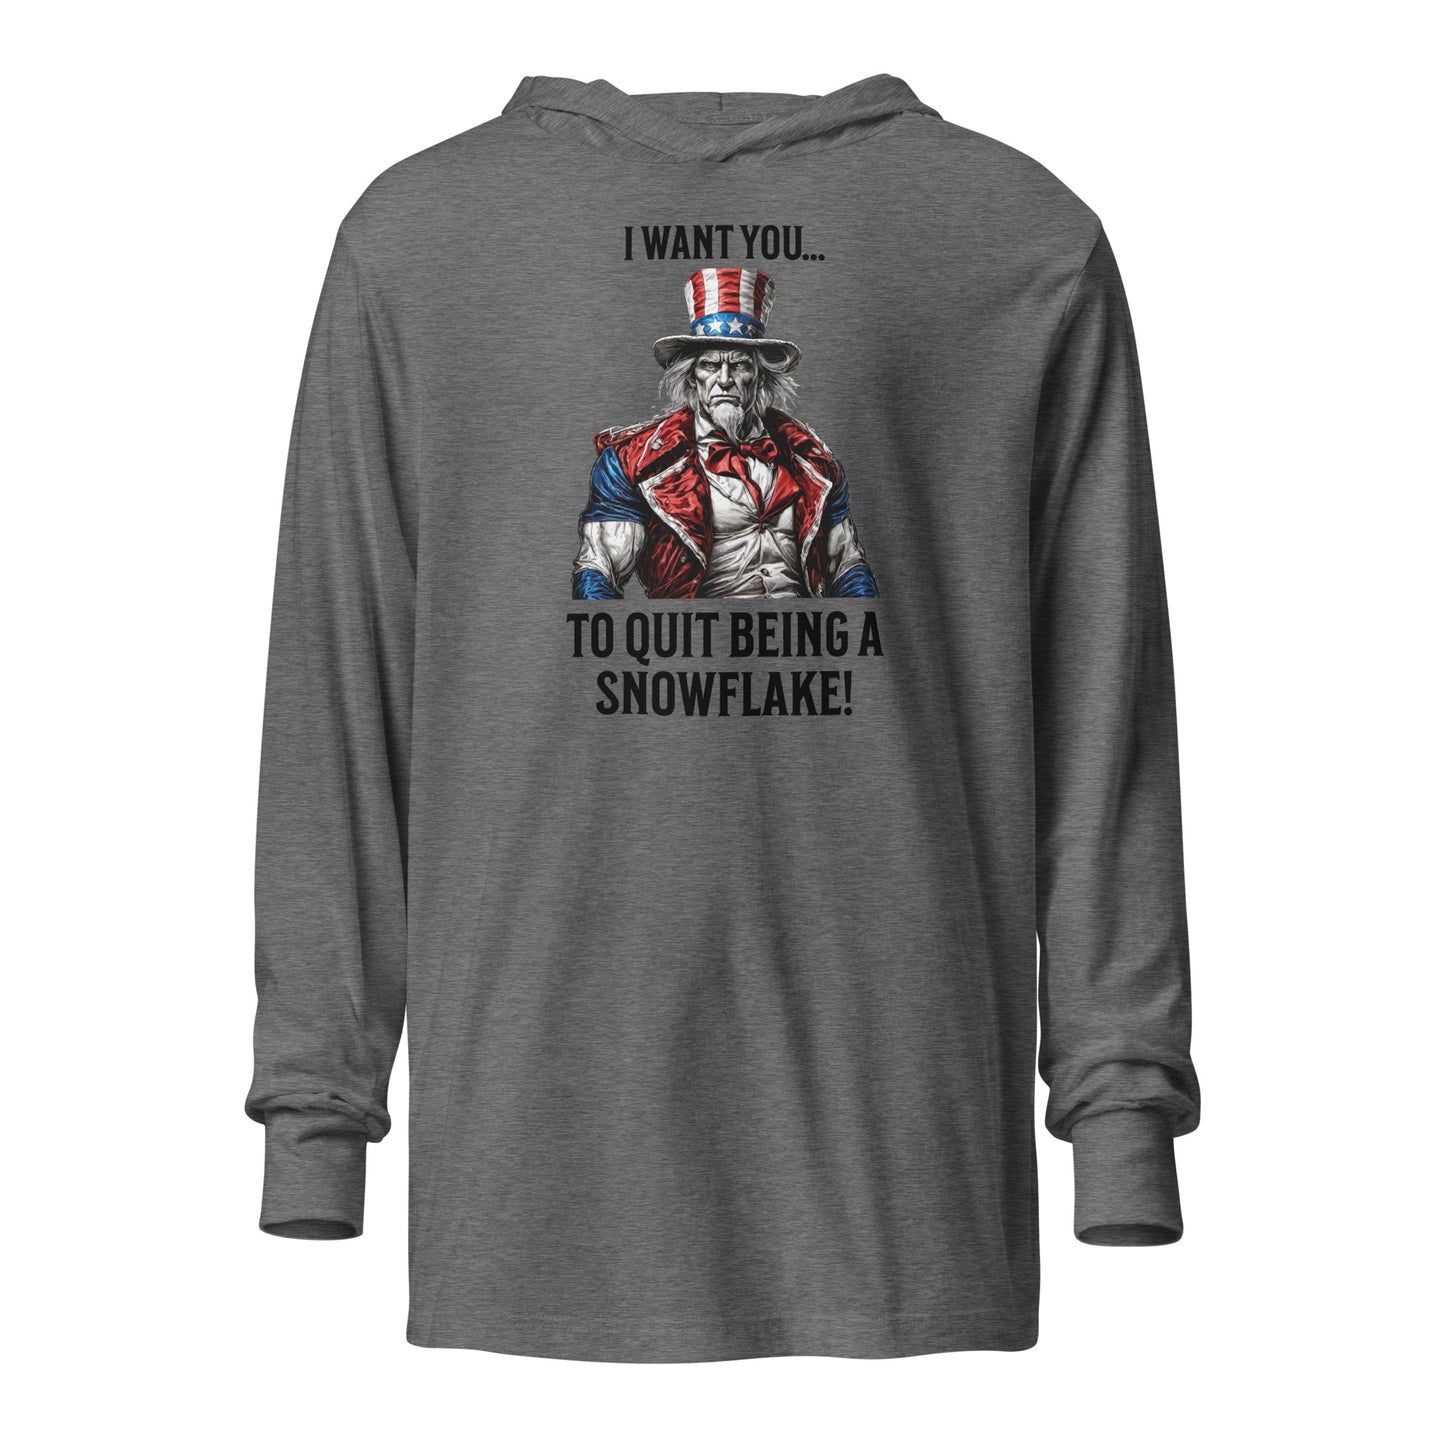 Quit Being a Snowflake Hooded Long-sleeve Tee Grey Triblend